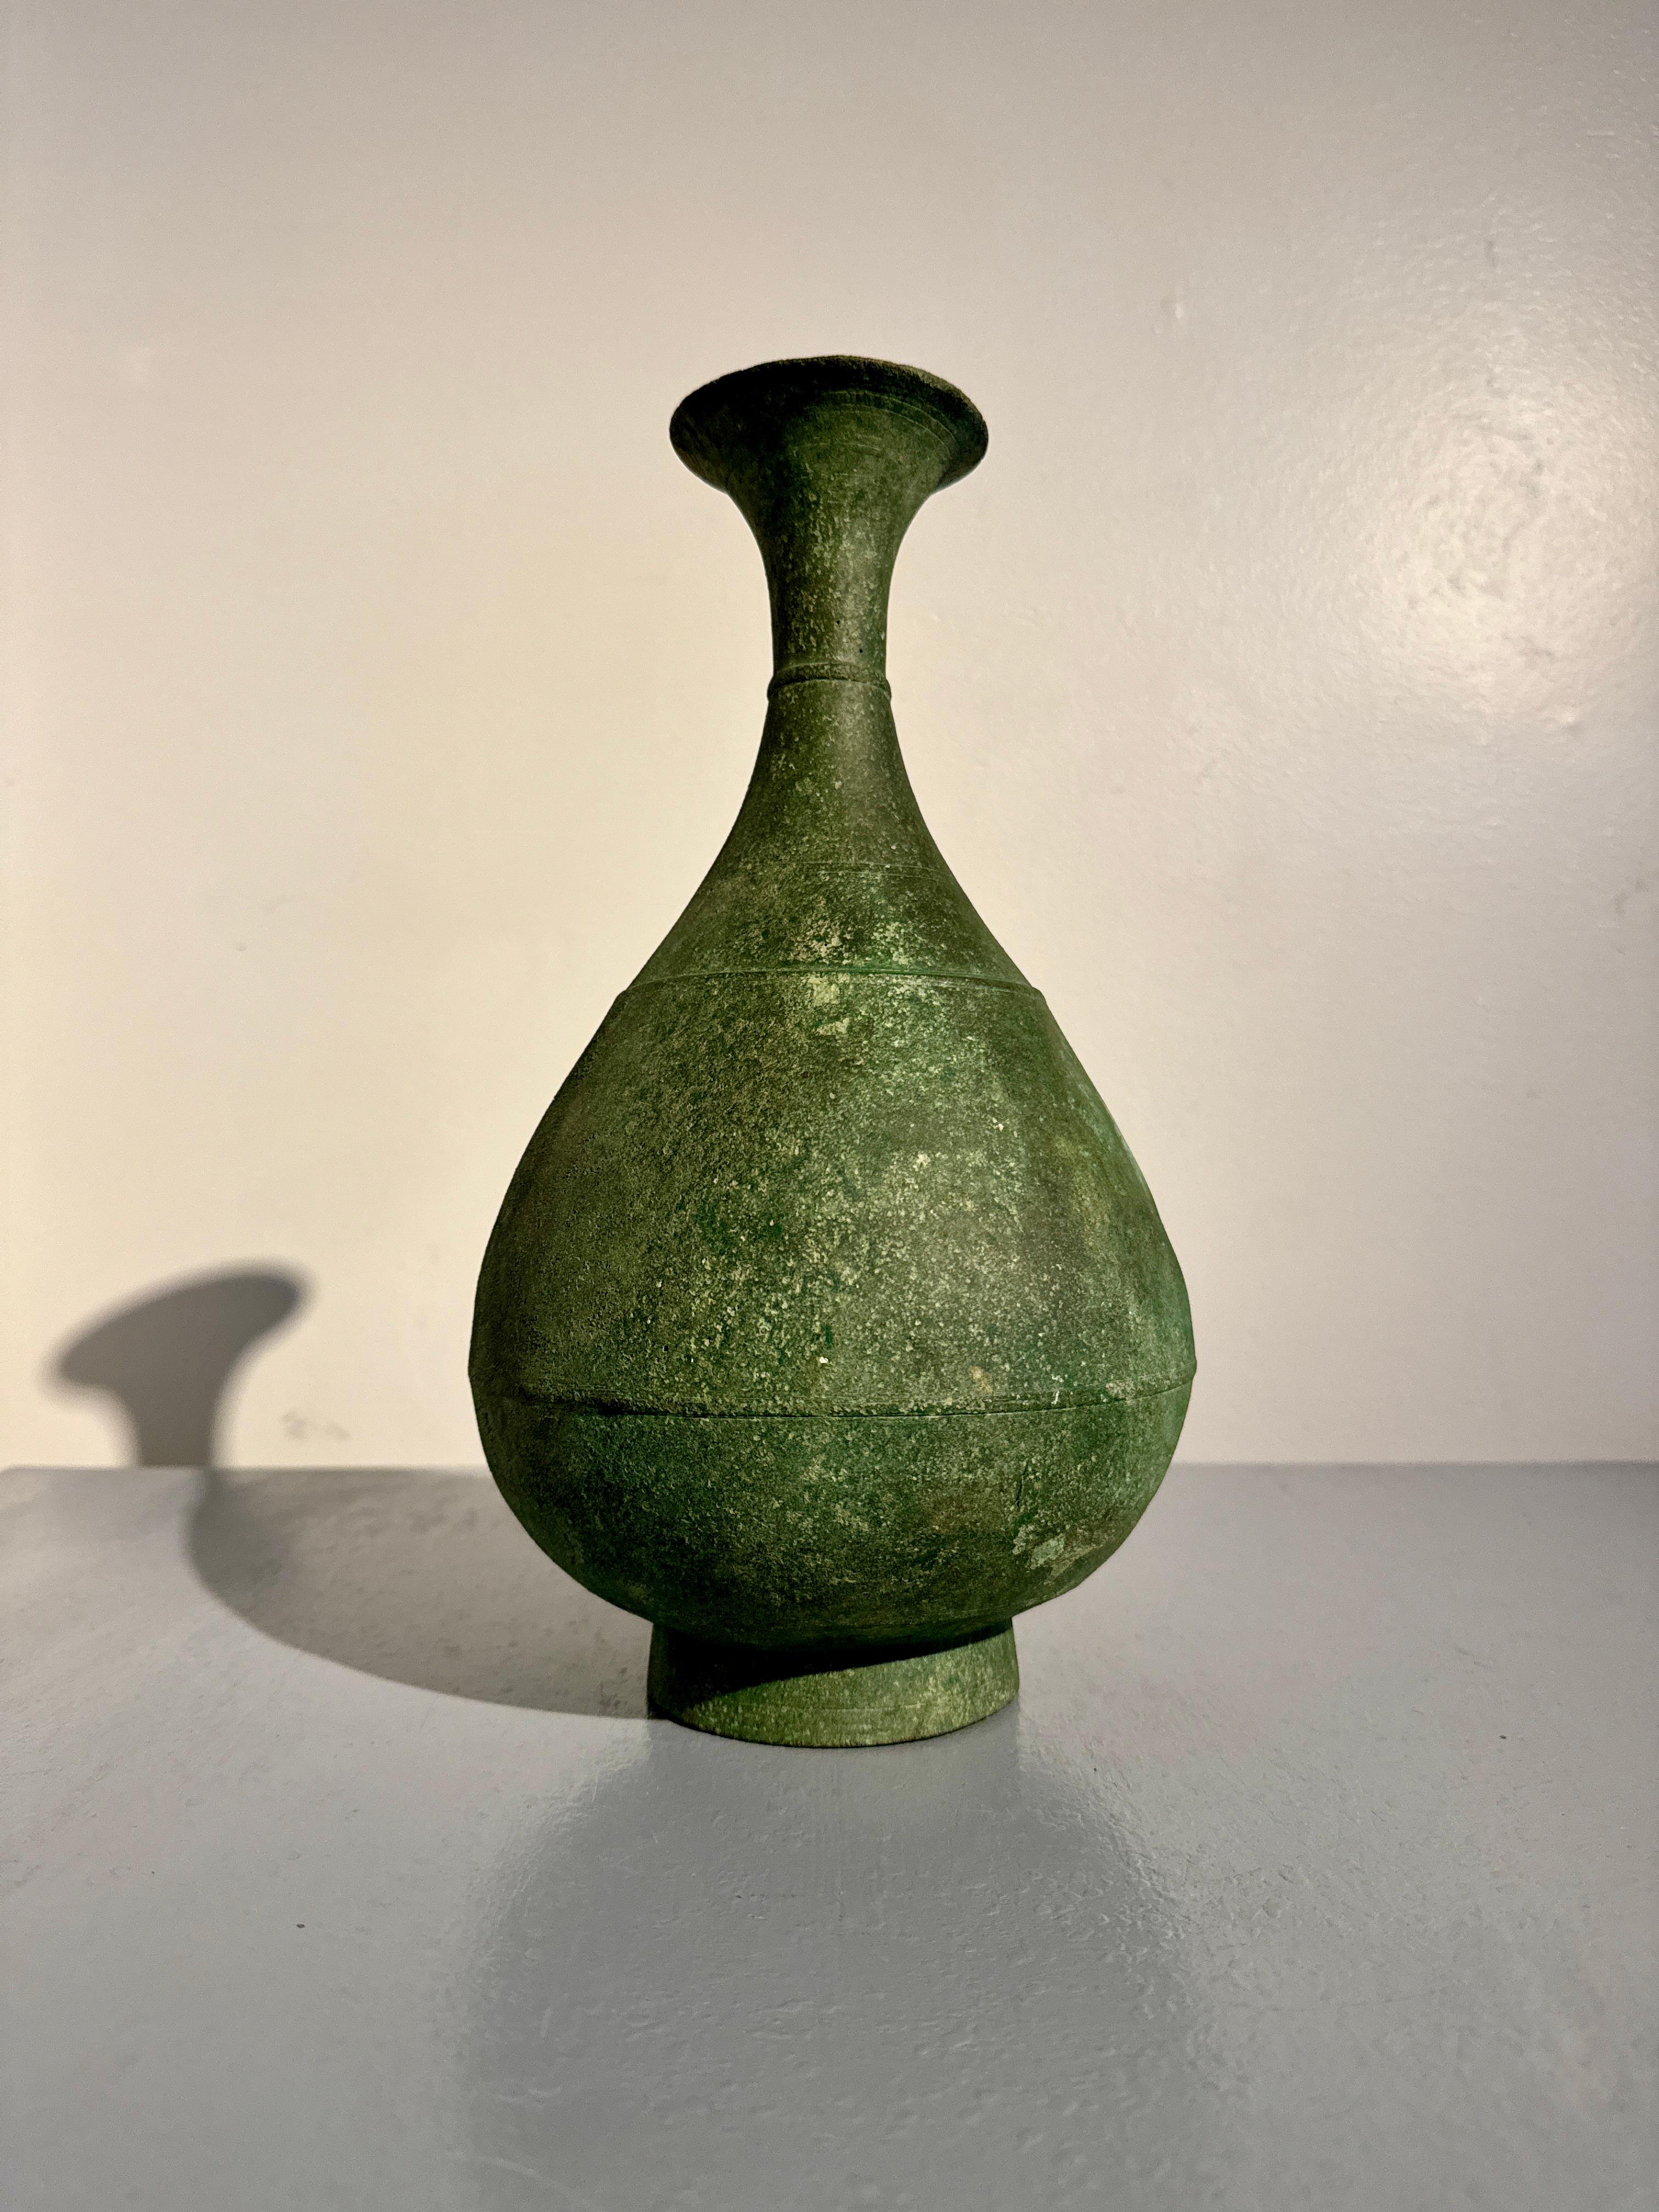 Cast Korean Goryeo Bronze Bottle Vase with Green Patina, 12th/13th Century For Sale